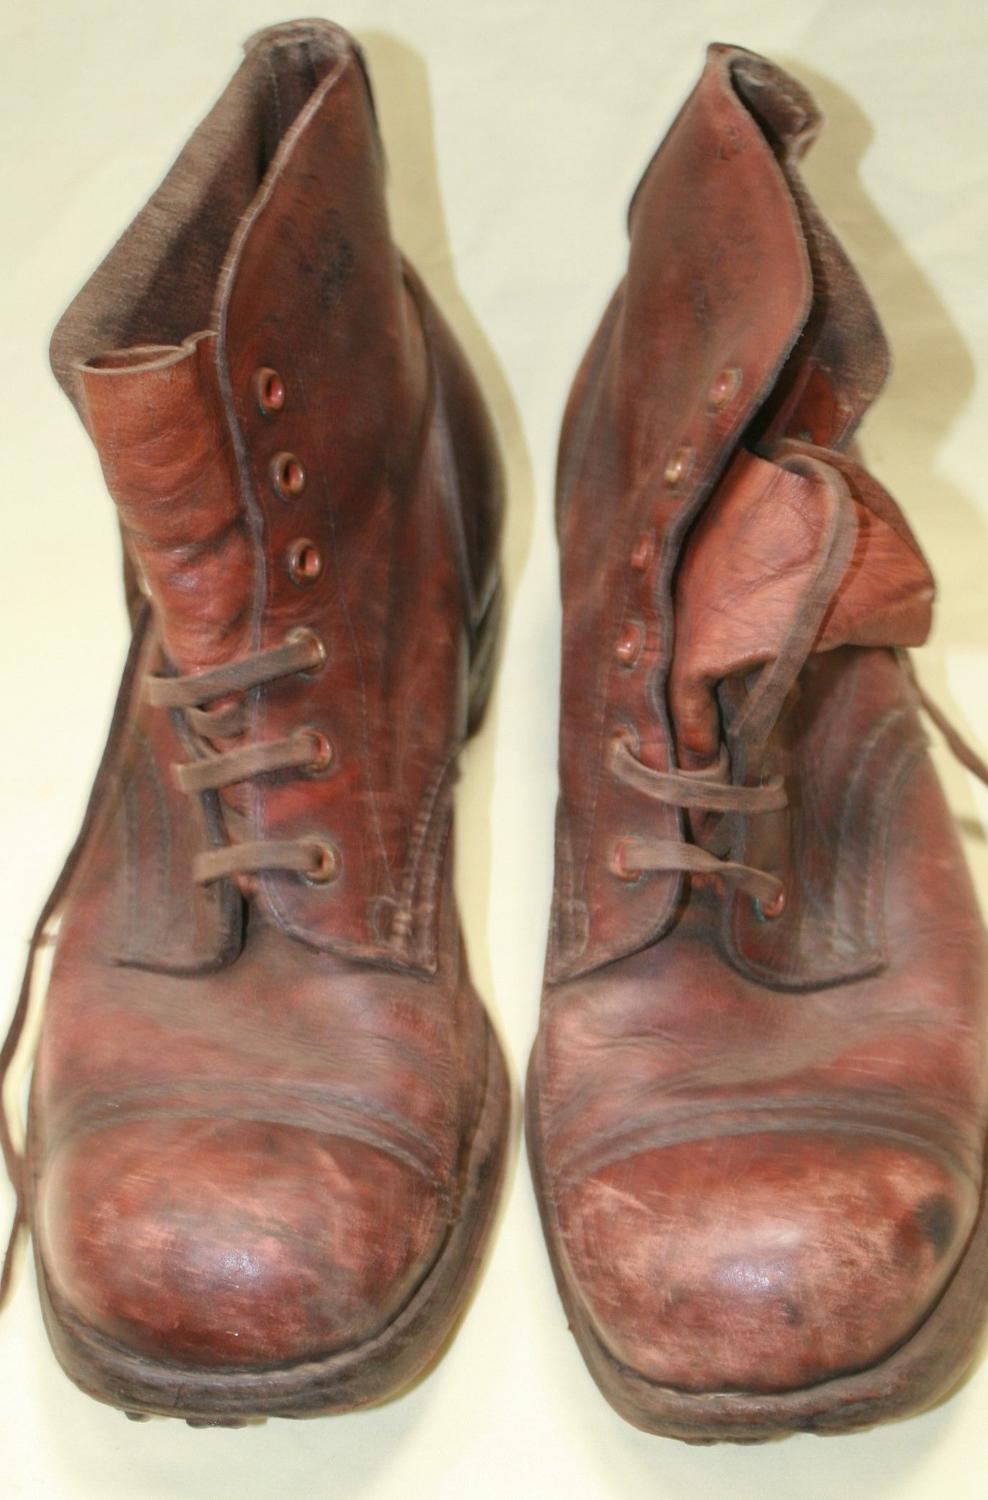 A PAIR OF AUSTRALIAN MADE 1945 DATED JUNGLE BOOTS WELL USED EXAMPLE